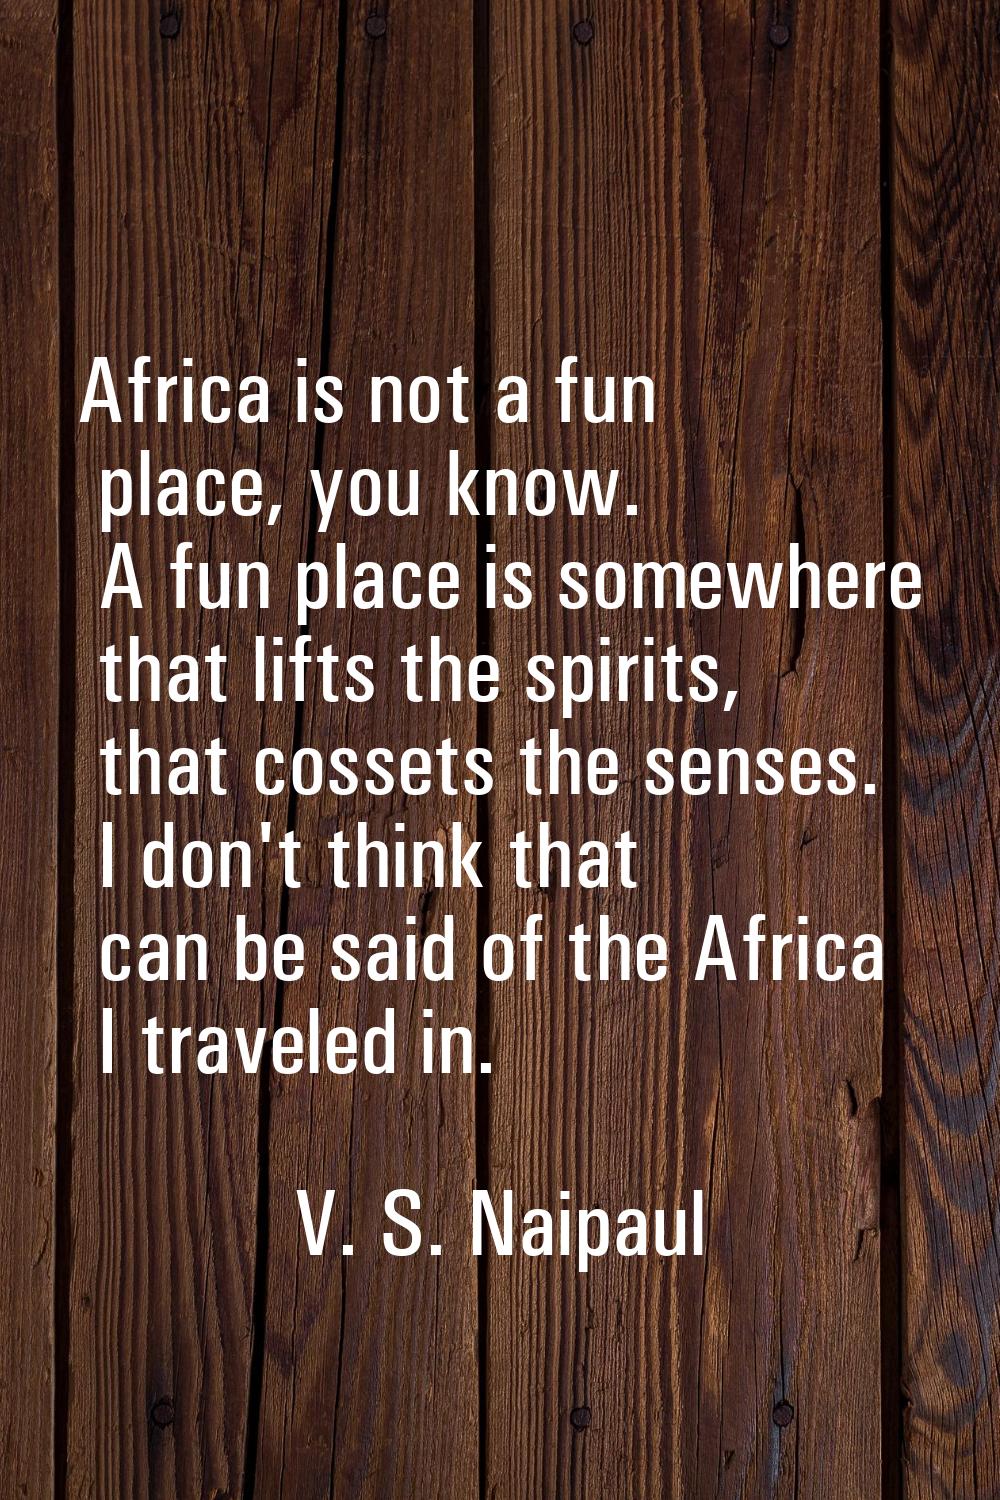 Africa is not a fun place, you know. A fun place is somewhere that lifts the spirits, that cossets 